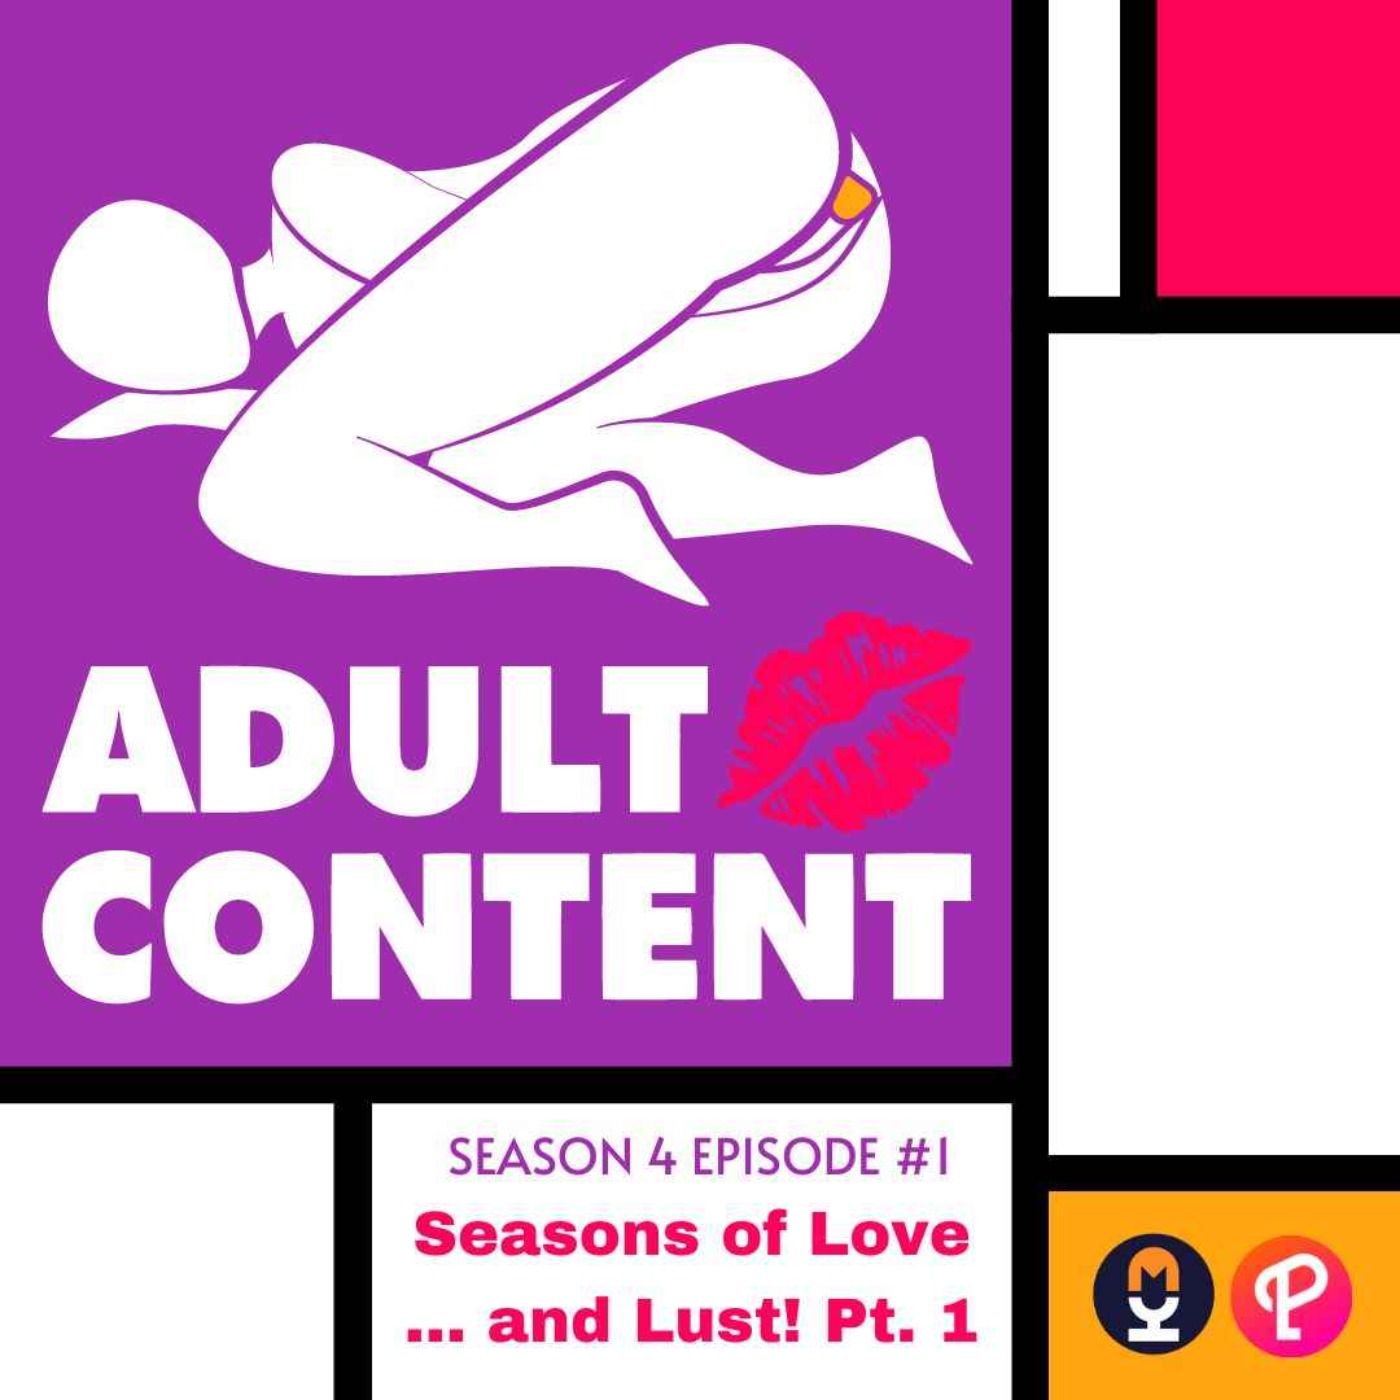 S4E1: Seasons of Love … and Lust! Pt. 1